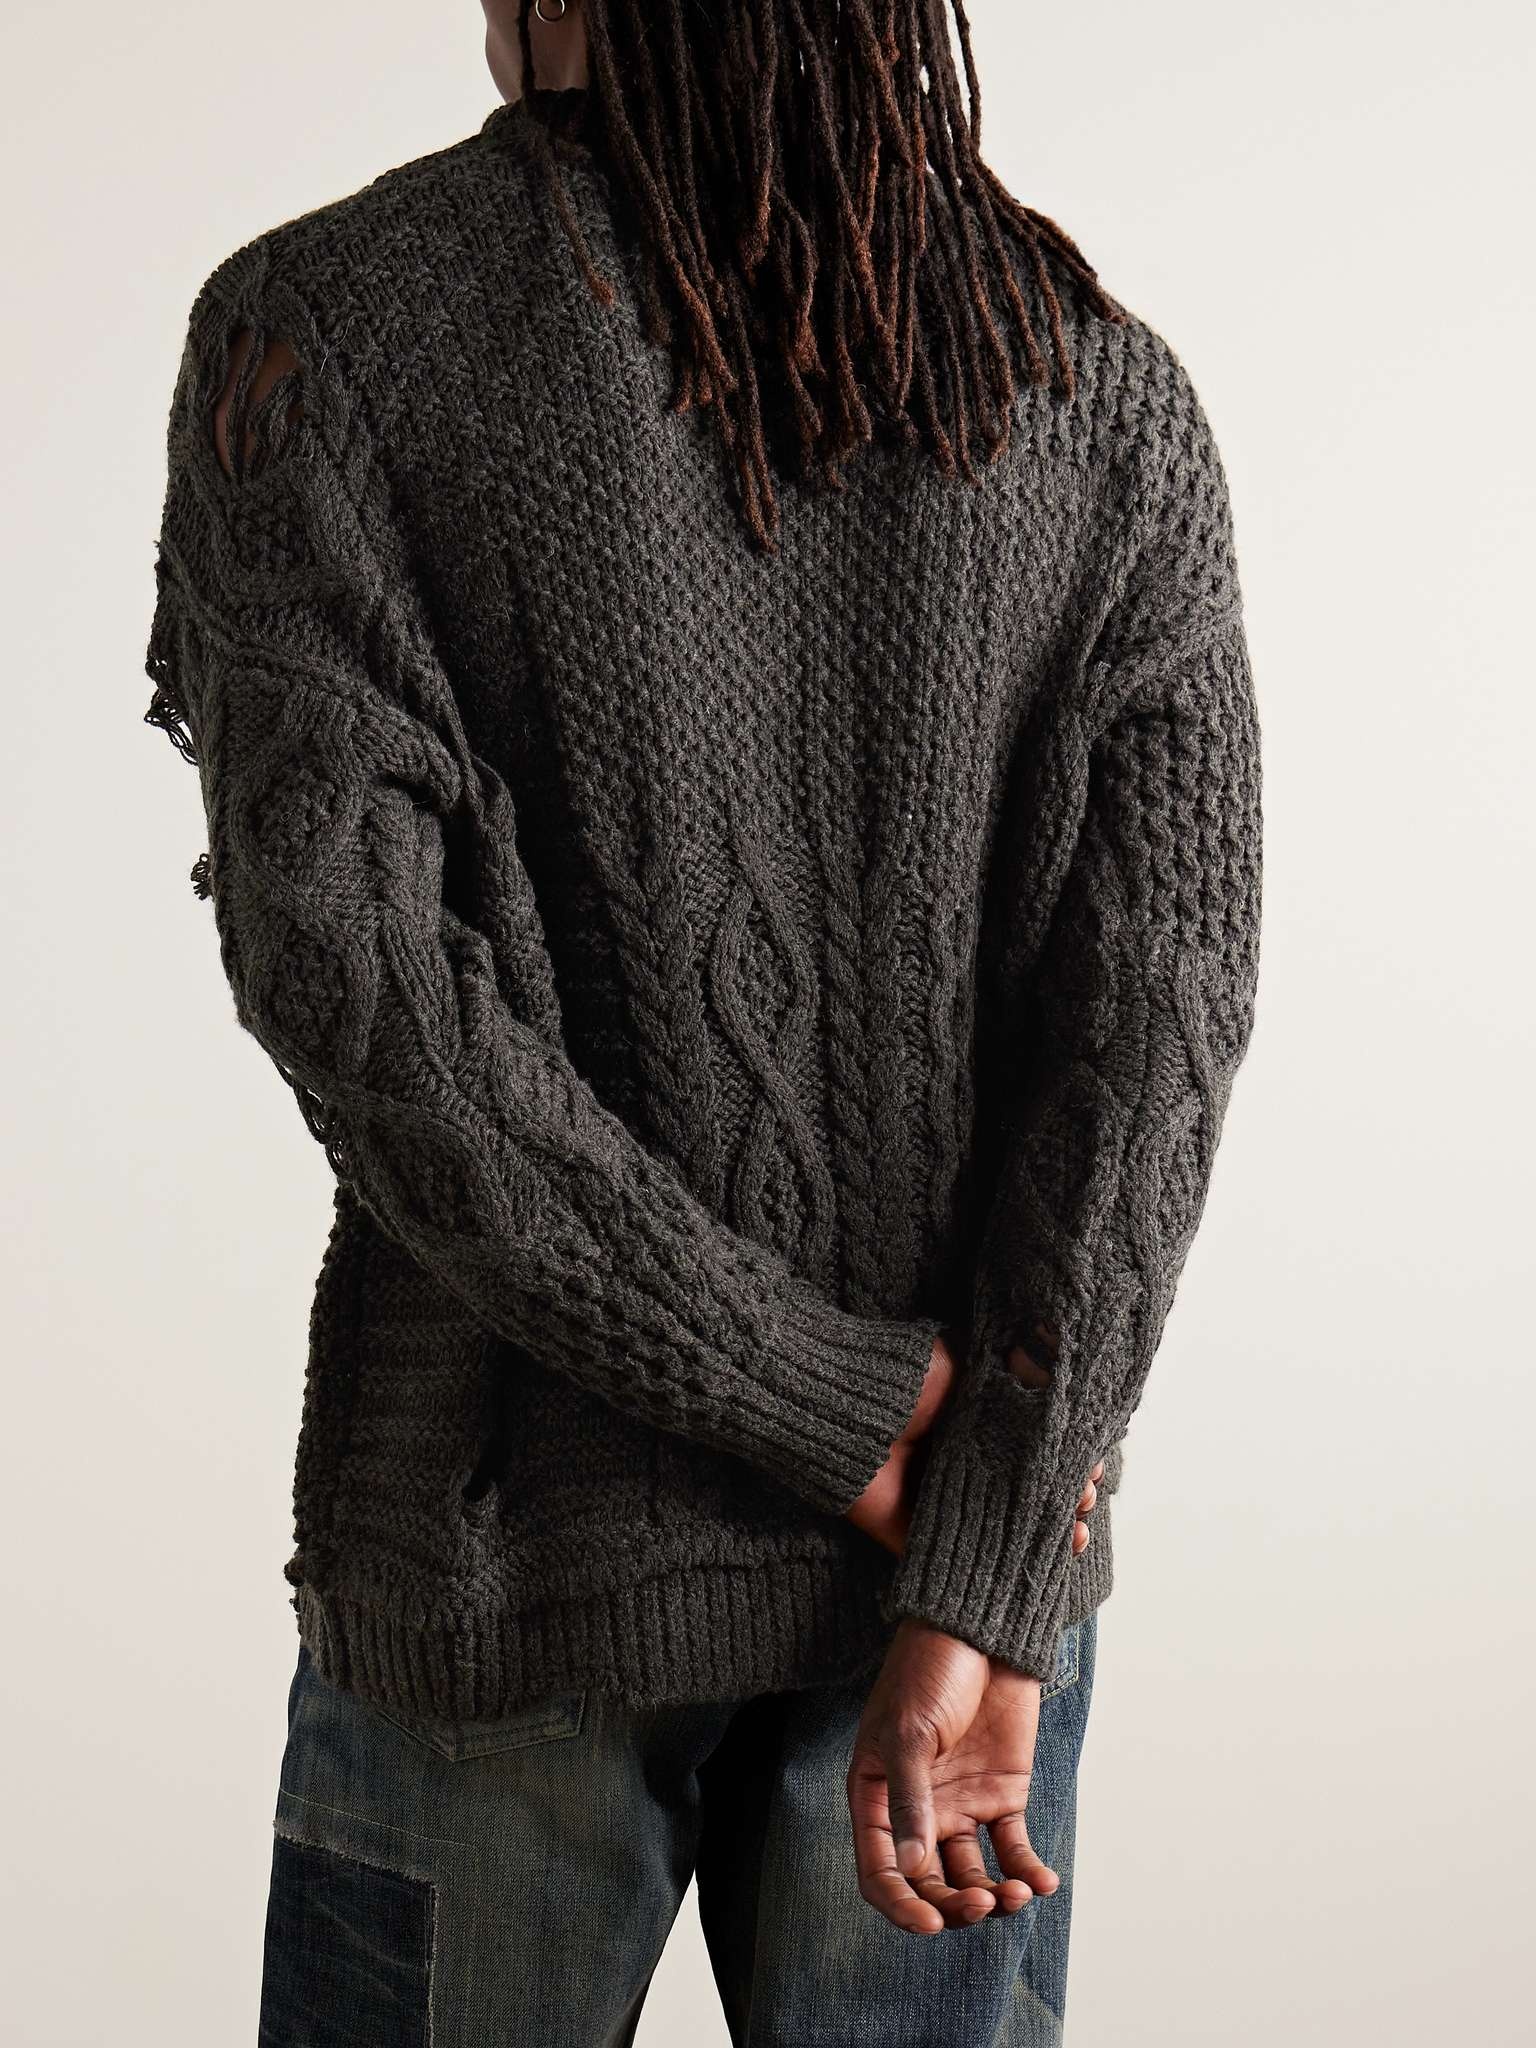 Savage Distressed Knitted Sweater - 3